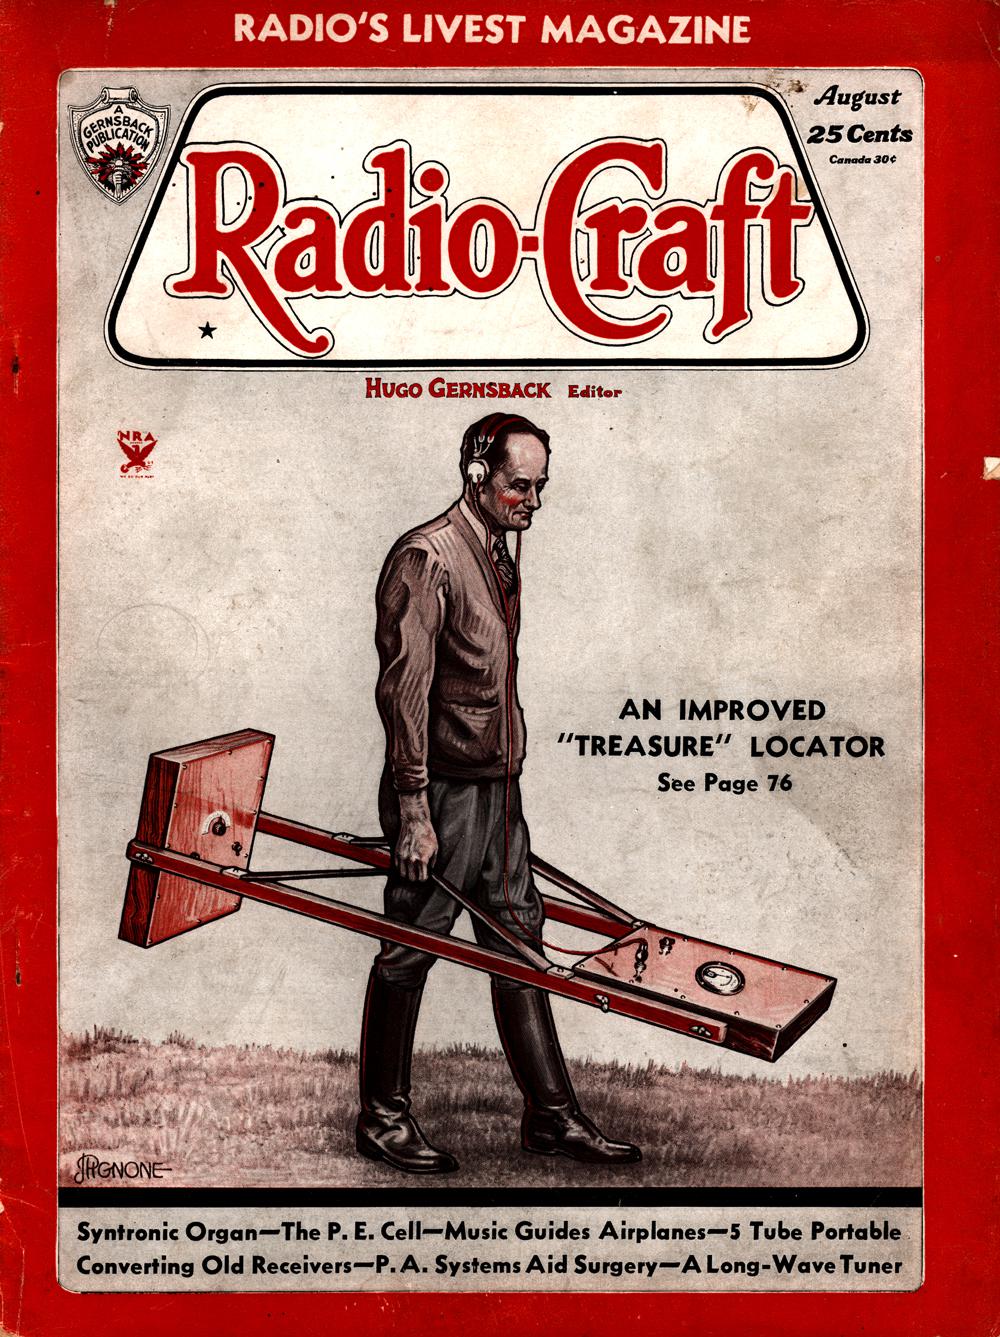 1934 - Radio-craft. and popular electronics; radio-electronics in all its phases - Vol. 6, No. 2